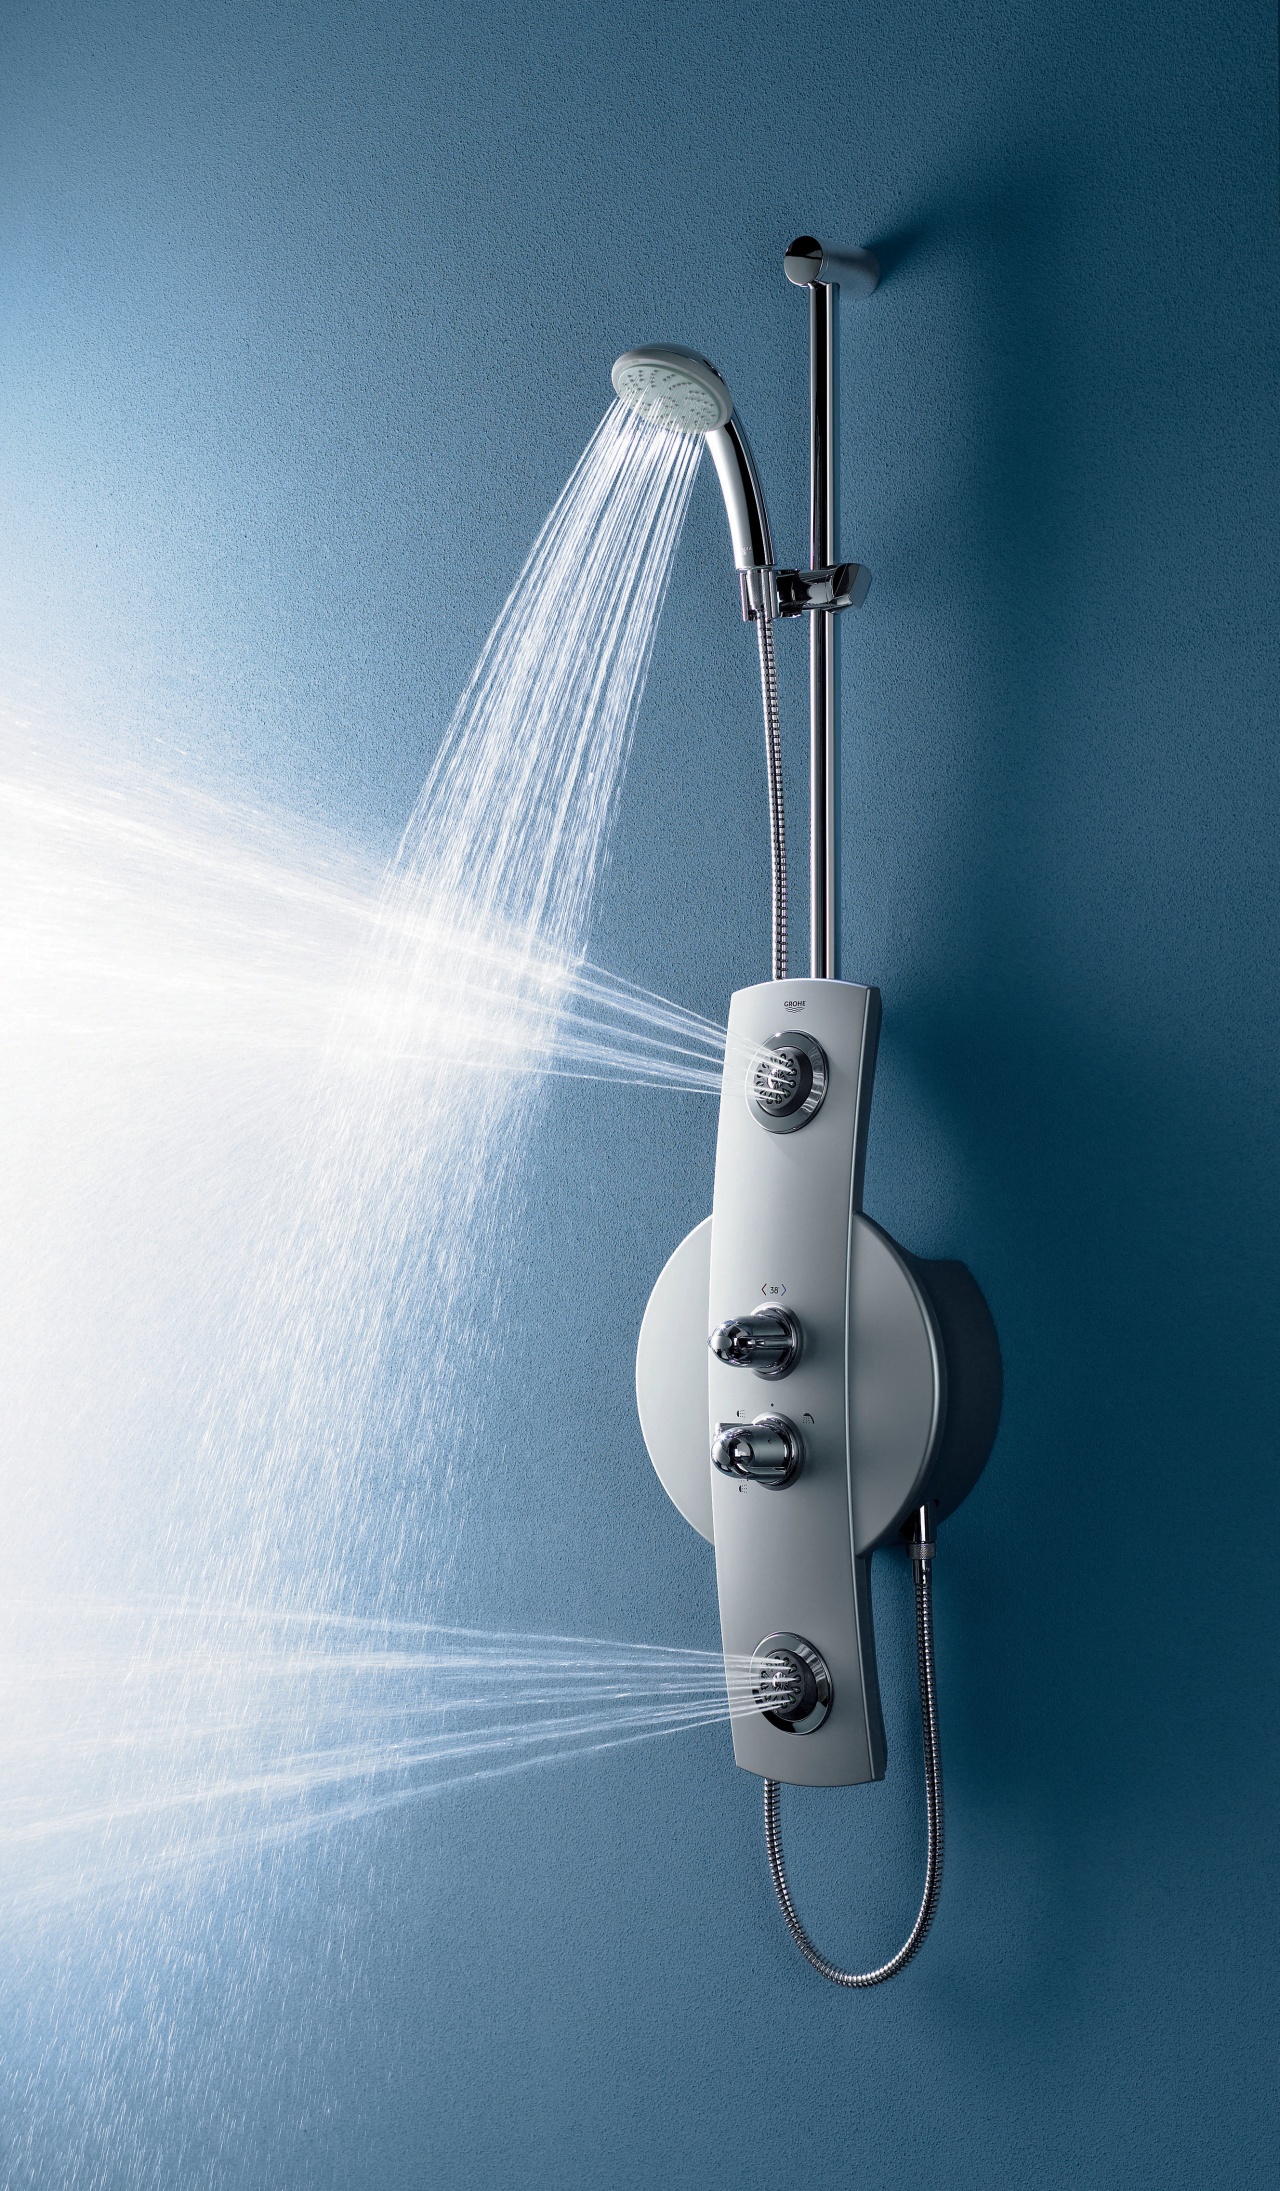 view of the stainless steel aquatower 1000 shower product, product design, teal